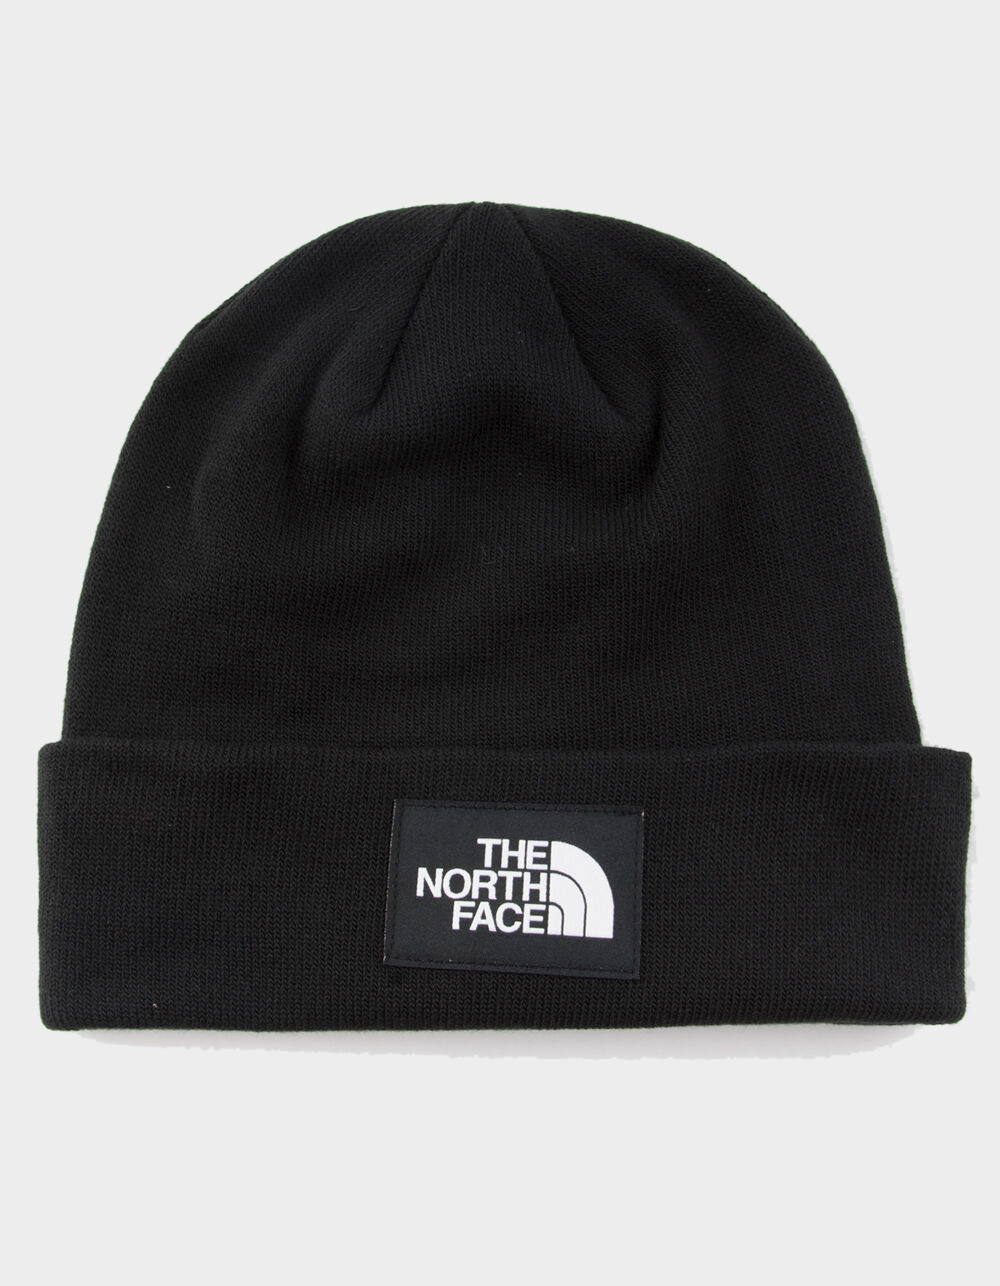 THE NORTH FACE Dock Worker Recycled Beanie - BLACK | Tillys